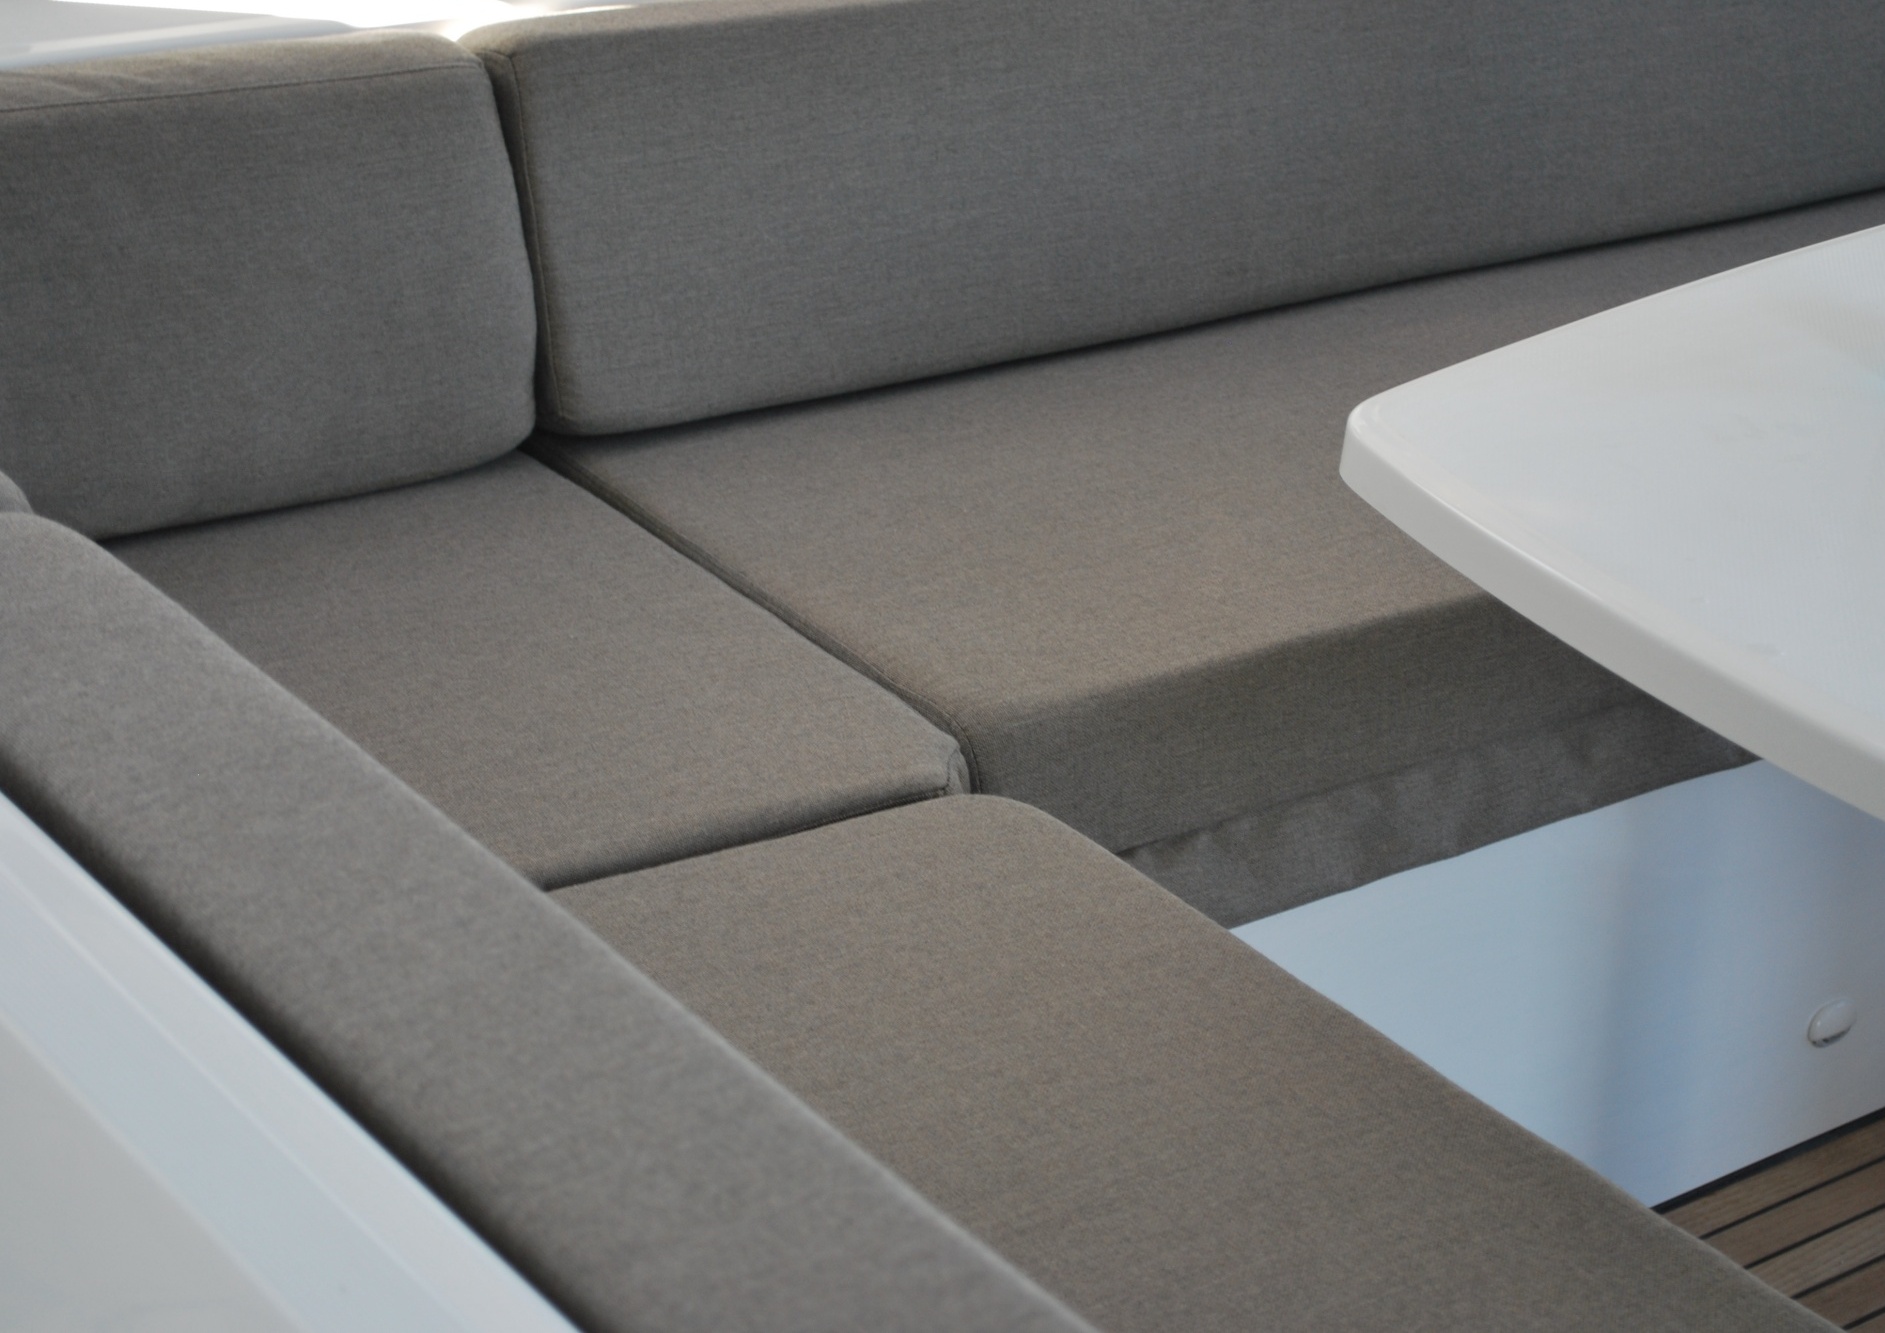 Straight lines & shape of grey yacht cushions in 10cm dryfast foam give elegance & comfort to the aft cockpit of the Lagoon.